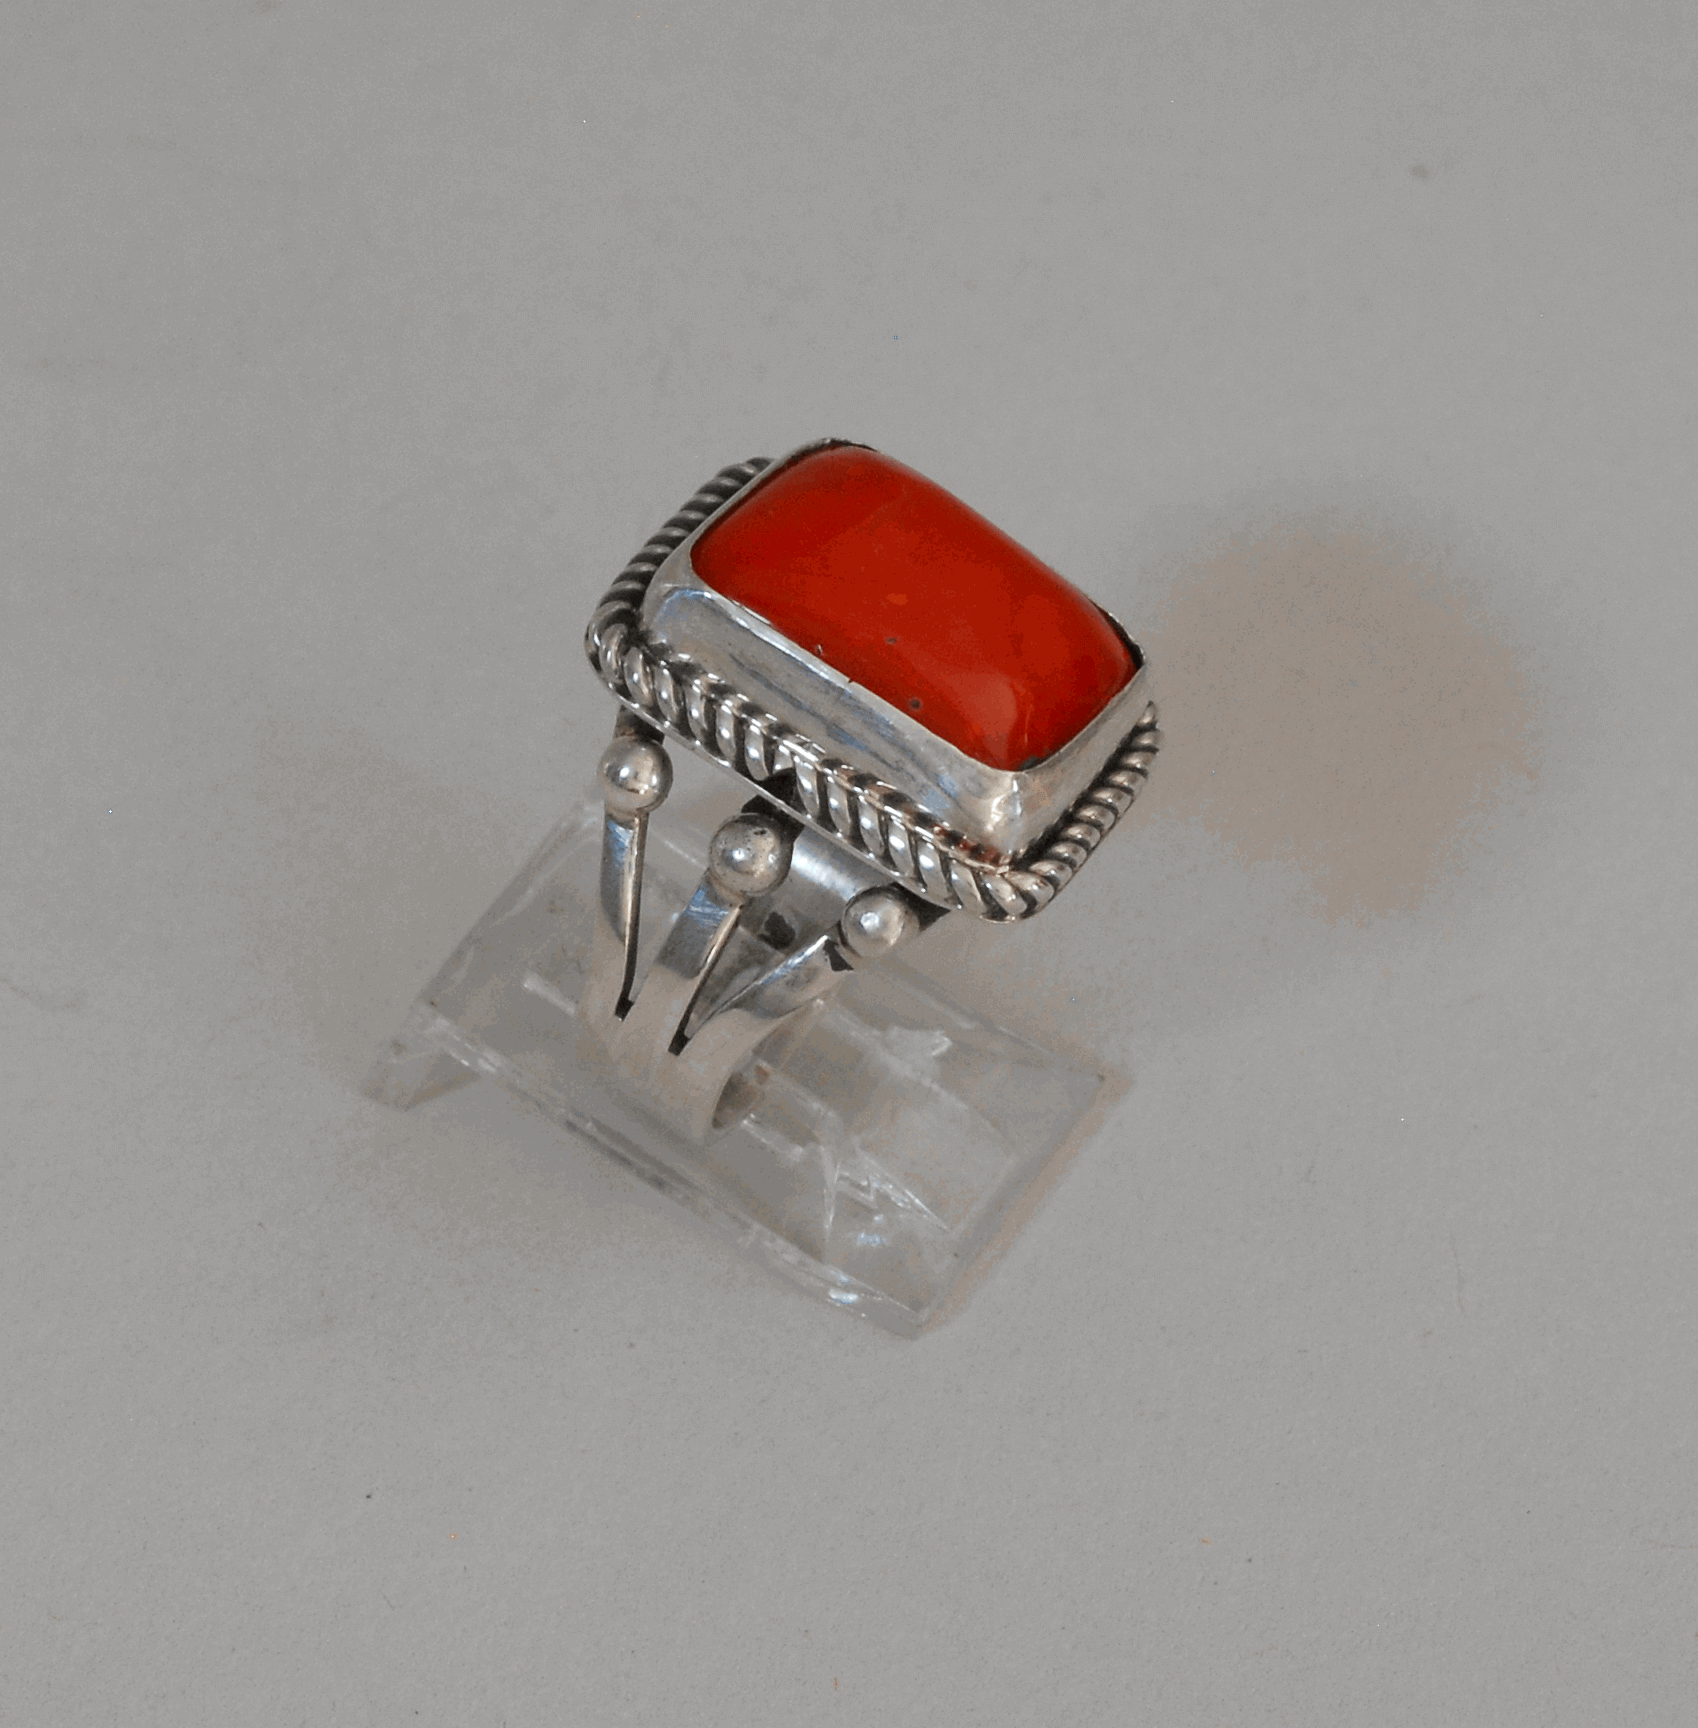 Red Coral Ring by Geneva Ramone